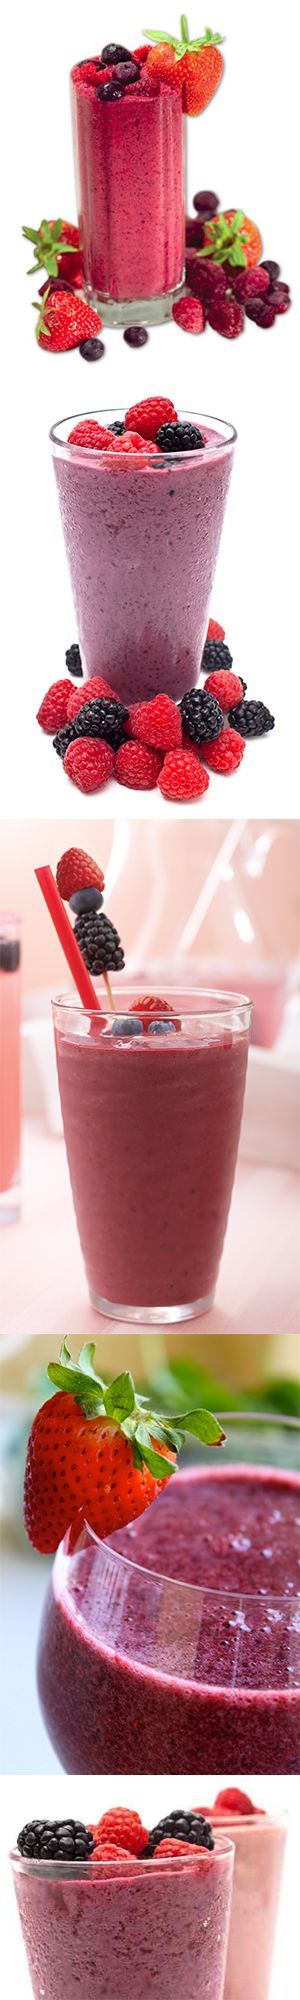 8 Awesome Healthy Berry Smoothie Recipes – Enjoy Glass Full of Nutrients – Part 1